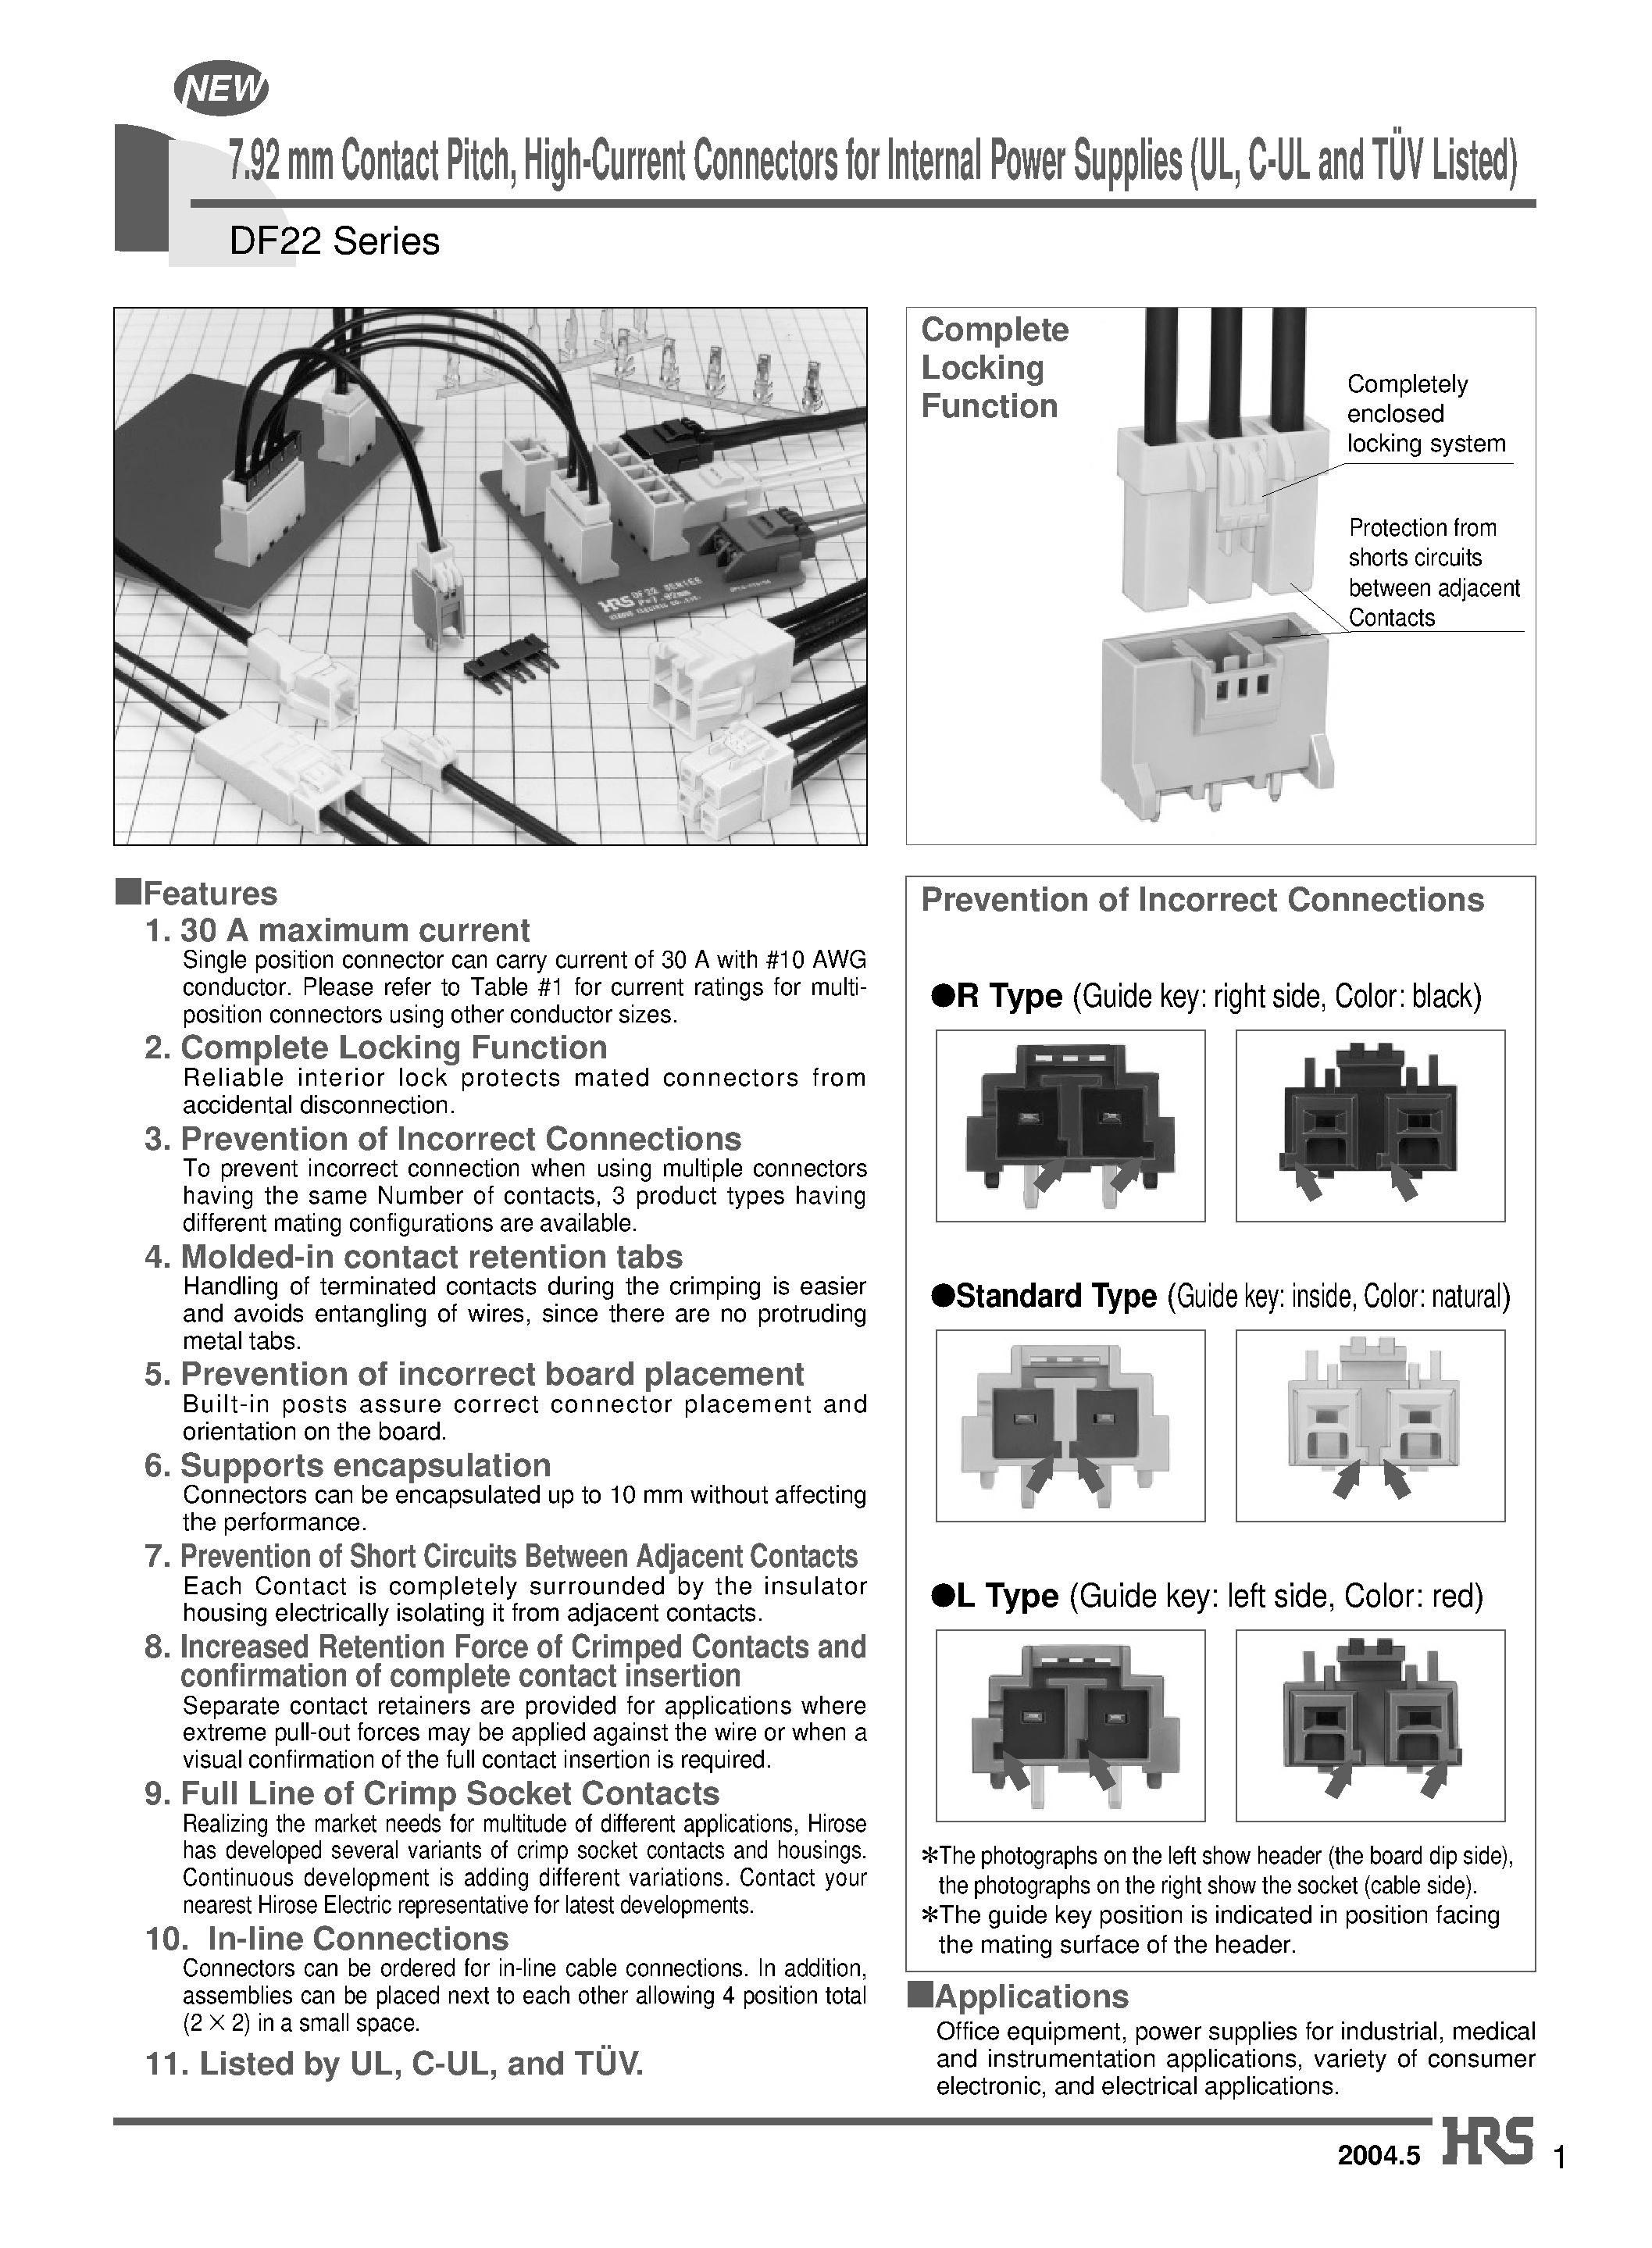 Даташит DF22AR-1P-7.92C - 7.92 mm Contact Pitch/ High-Current Connectors for Internal Power Supplies (UL/ C-UL and TUV Listed) страница 1